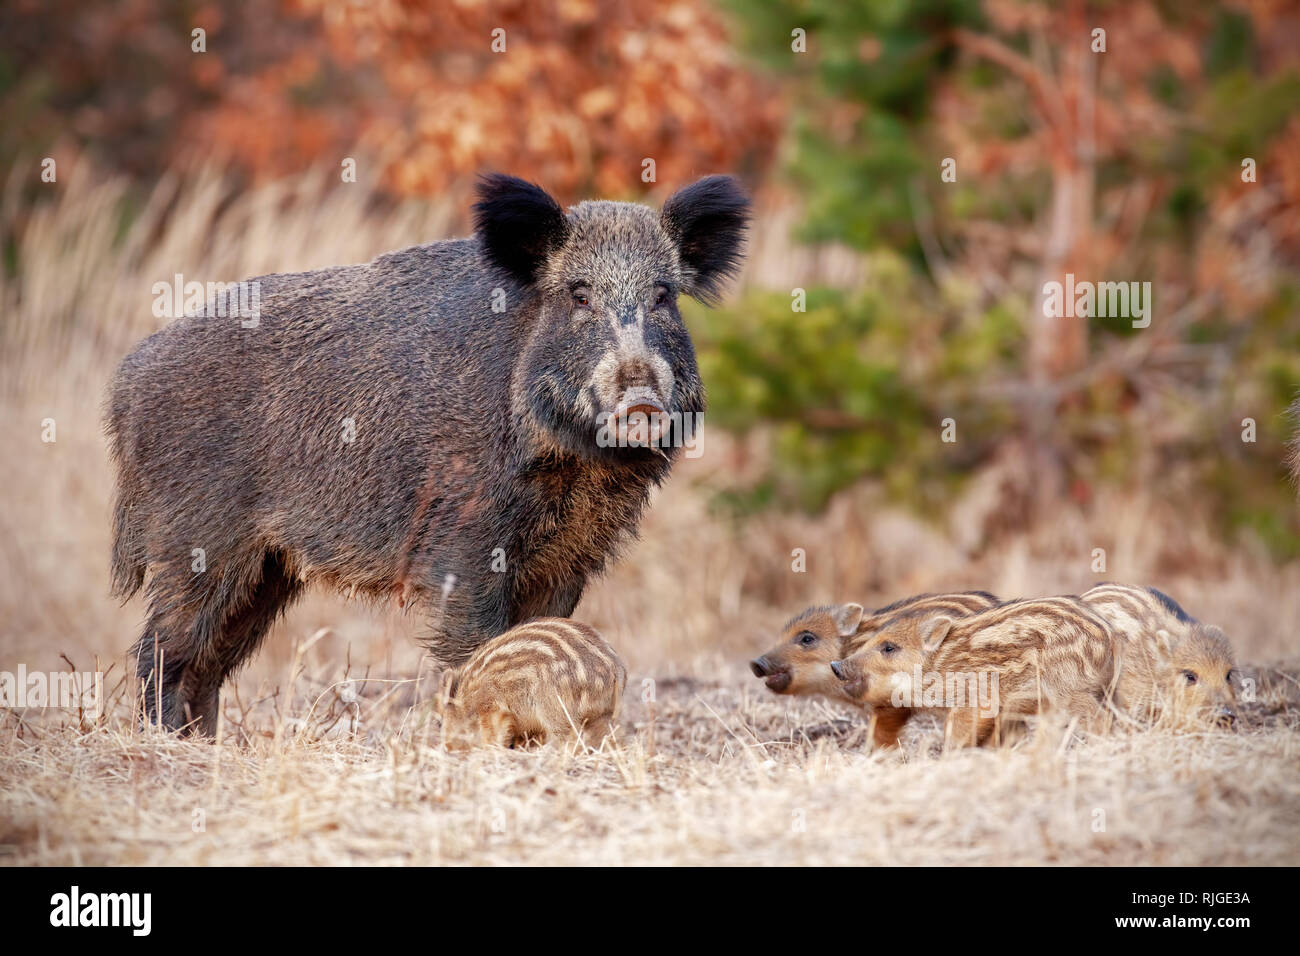 Wild boar family in nature with sow and small stripped piglets. Stock Photo